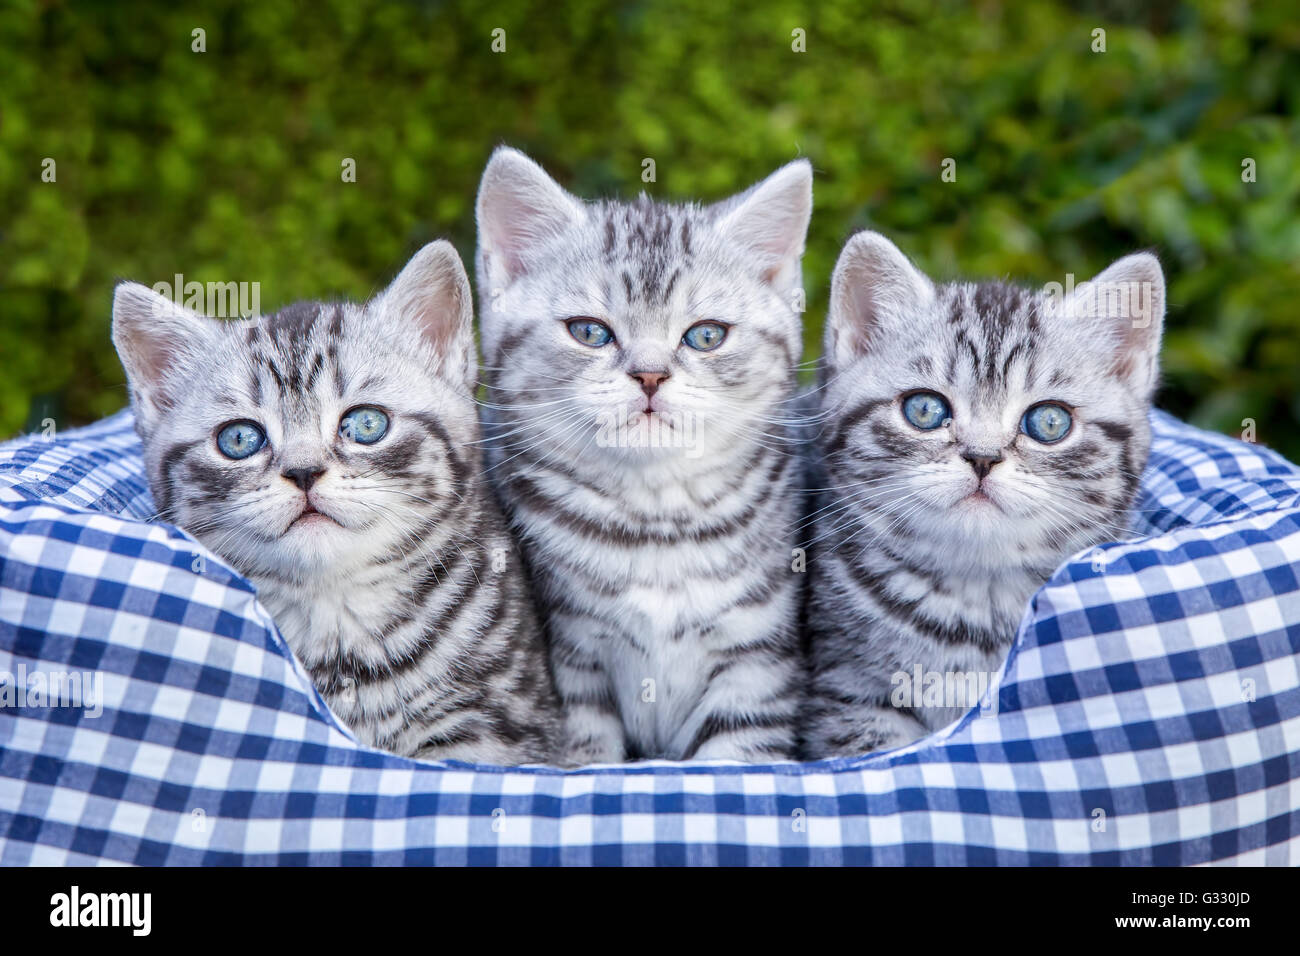 Three young british short hair black silver tabby spotted kittens sitting in checkered basket Stock Photo